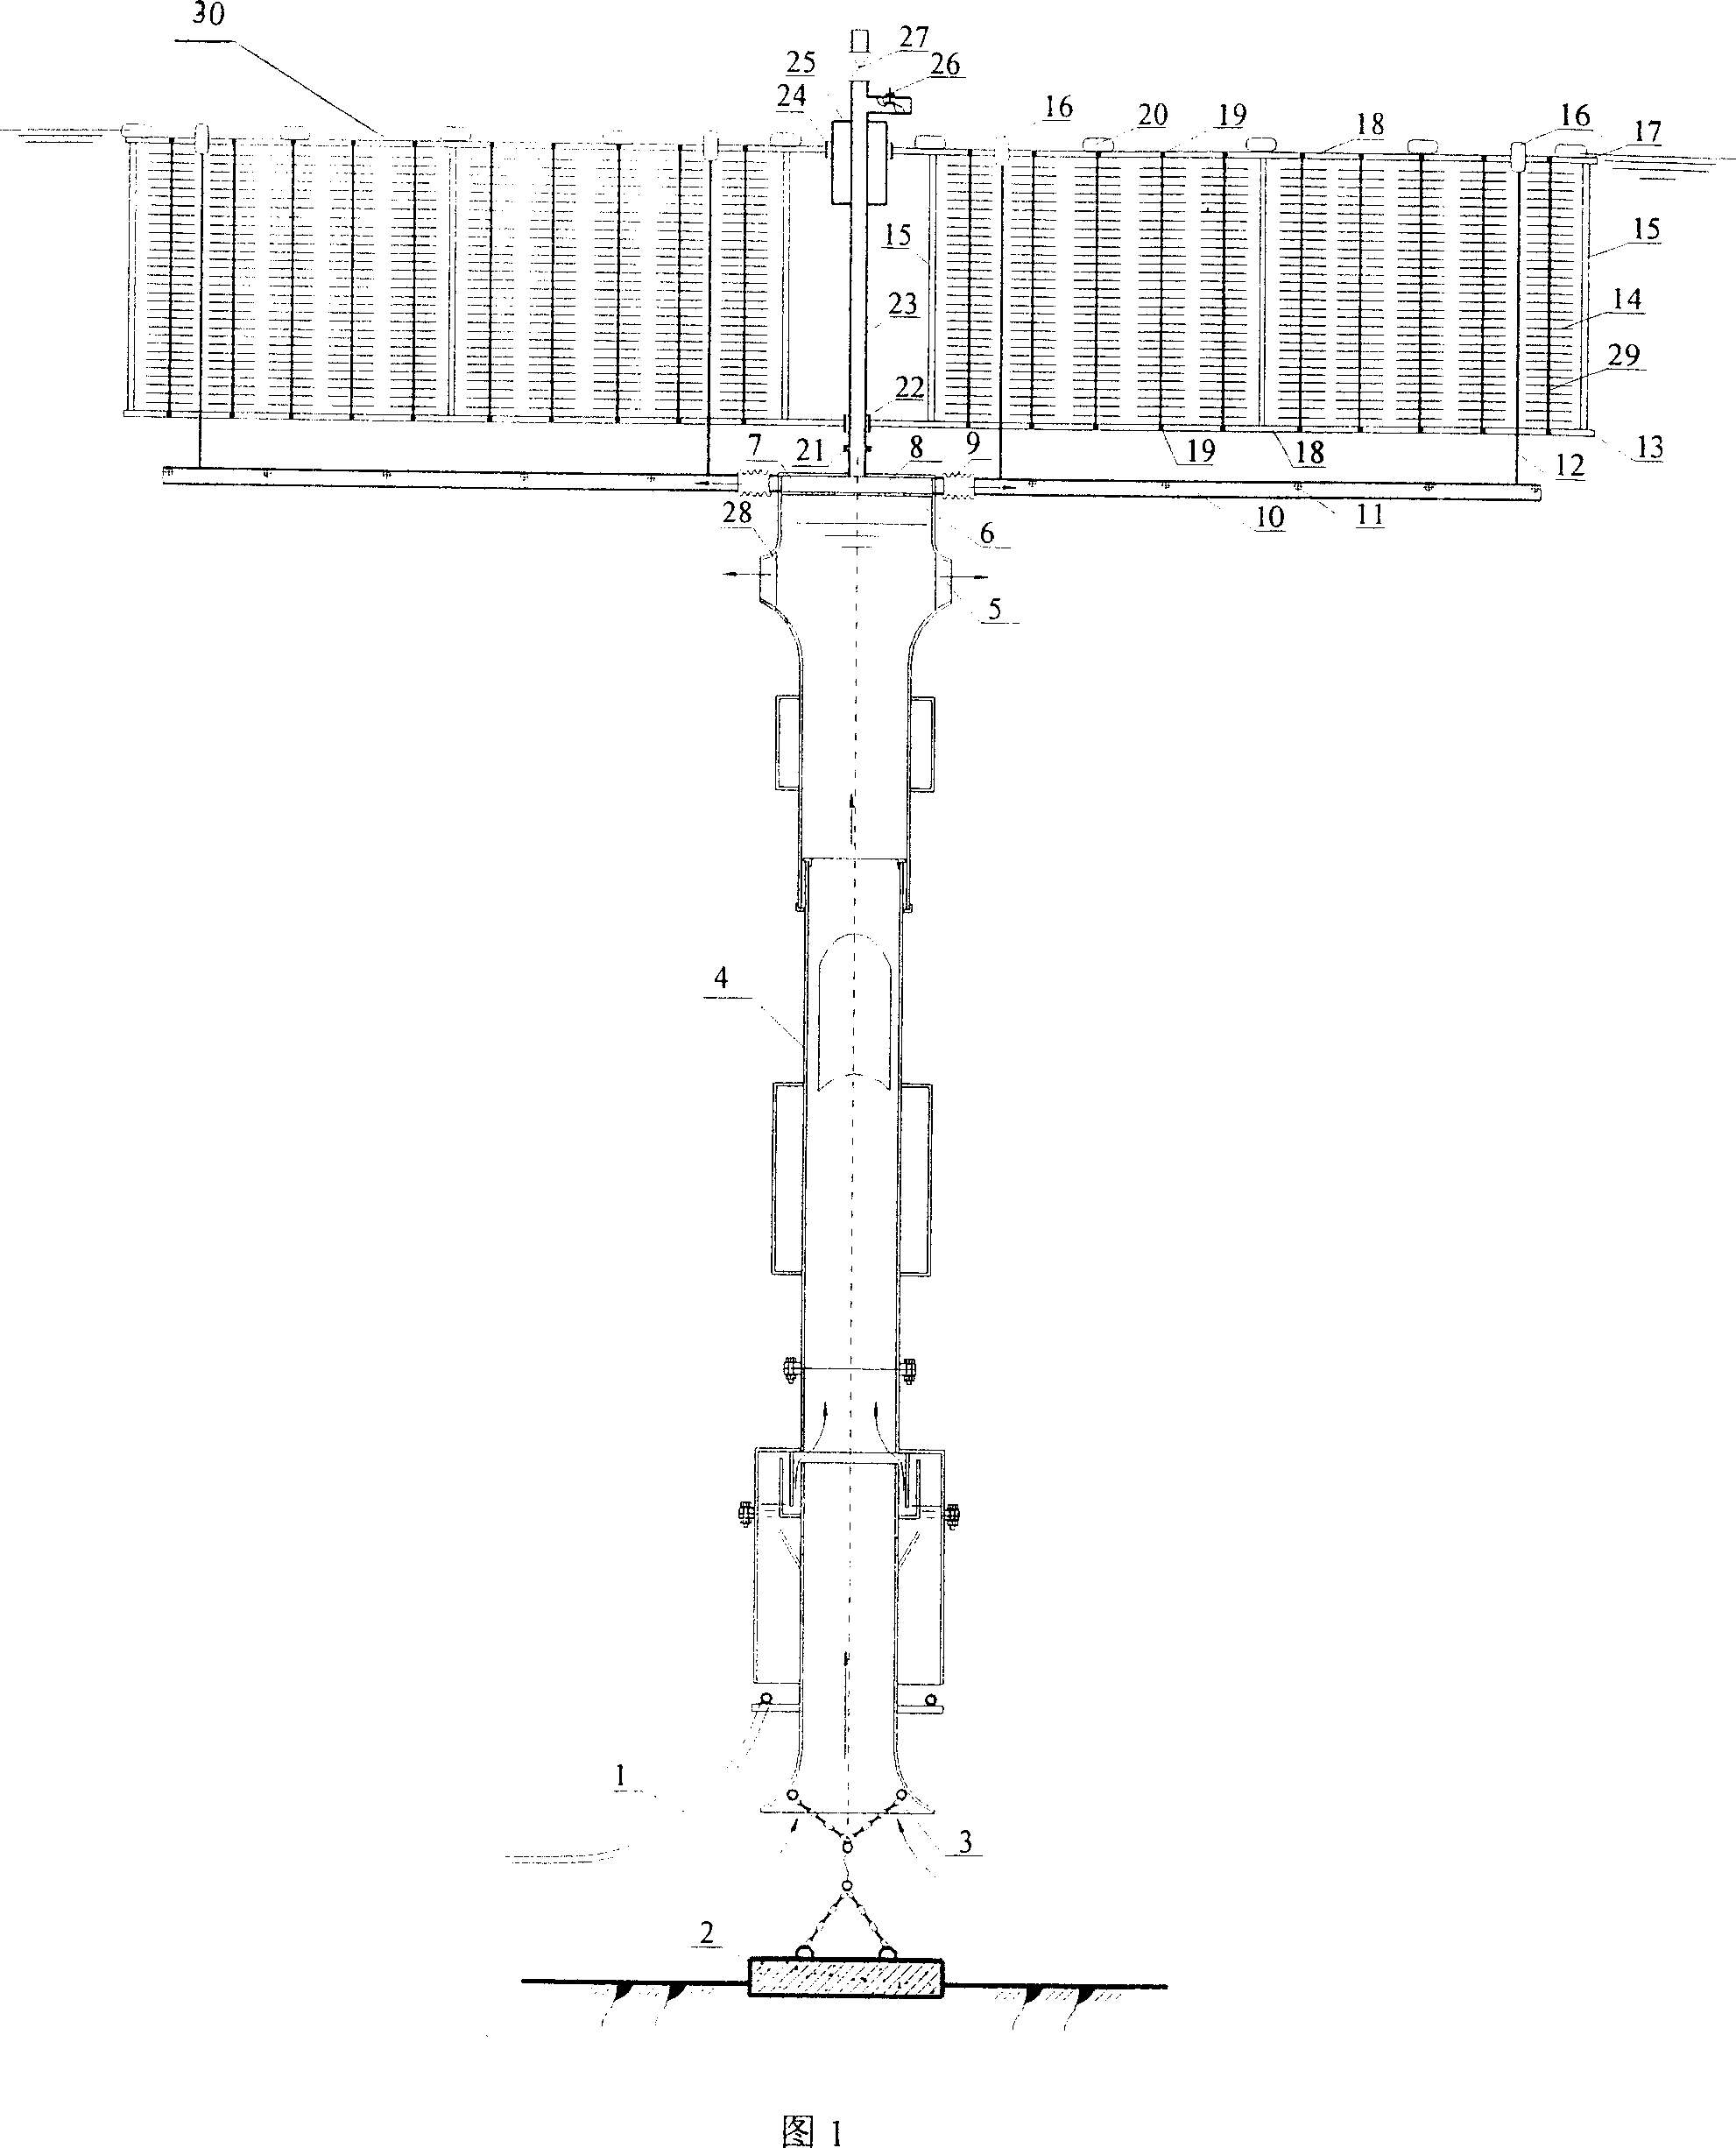 Reinforced biological contacting oxidation water correction apparatus